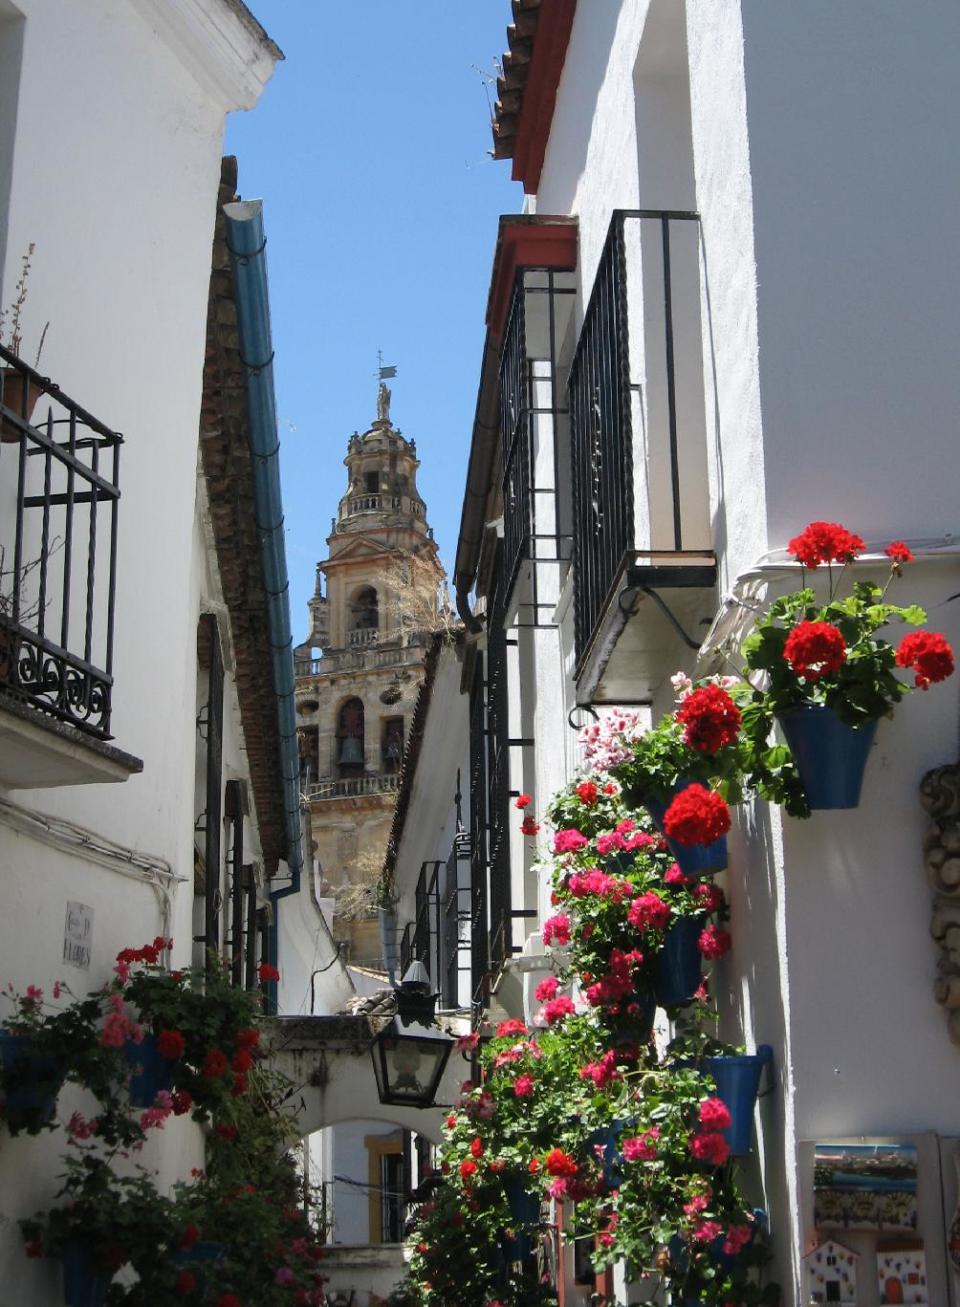 This June 4, 2013 photo shows the bell tower of the Mezquita cathedral framed by bright flower pots along narrow Calleja de las flores, a whitewashed alley in the city old Jewish neighborhood of Cordoba, in Andalusia, Spain. Andalusia offers a fusion of Christian and Islamic cultures, found in architectural masterpieces and in everyday life. (AP Photo/ Giovanna Dell'Orto)